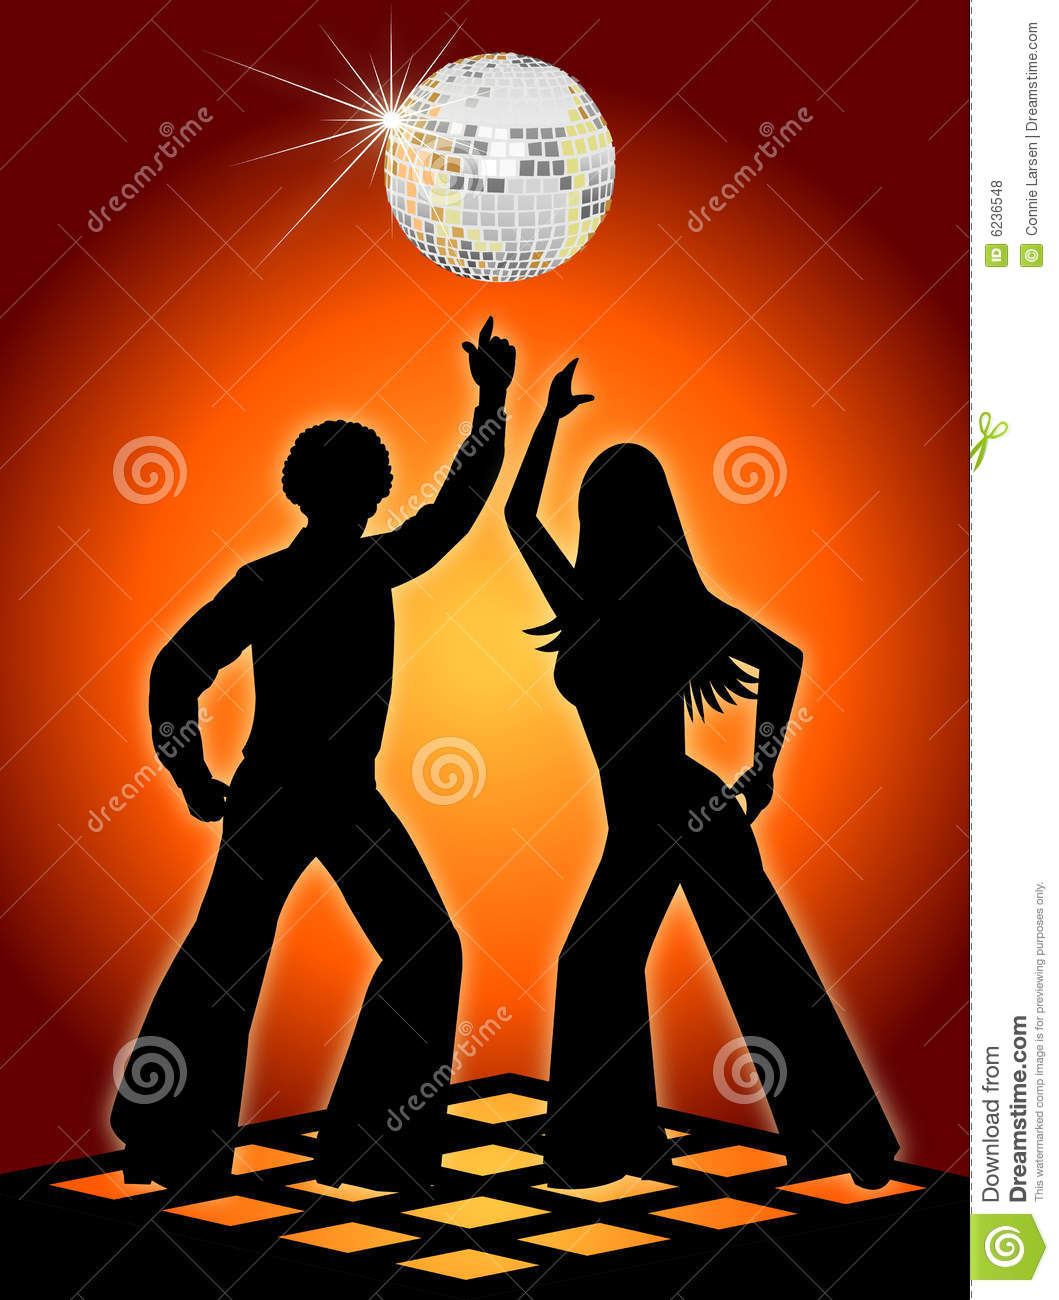 Silhouette Illustration Of Two Retro Seventies Style Disco Dancers In